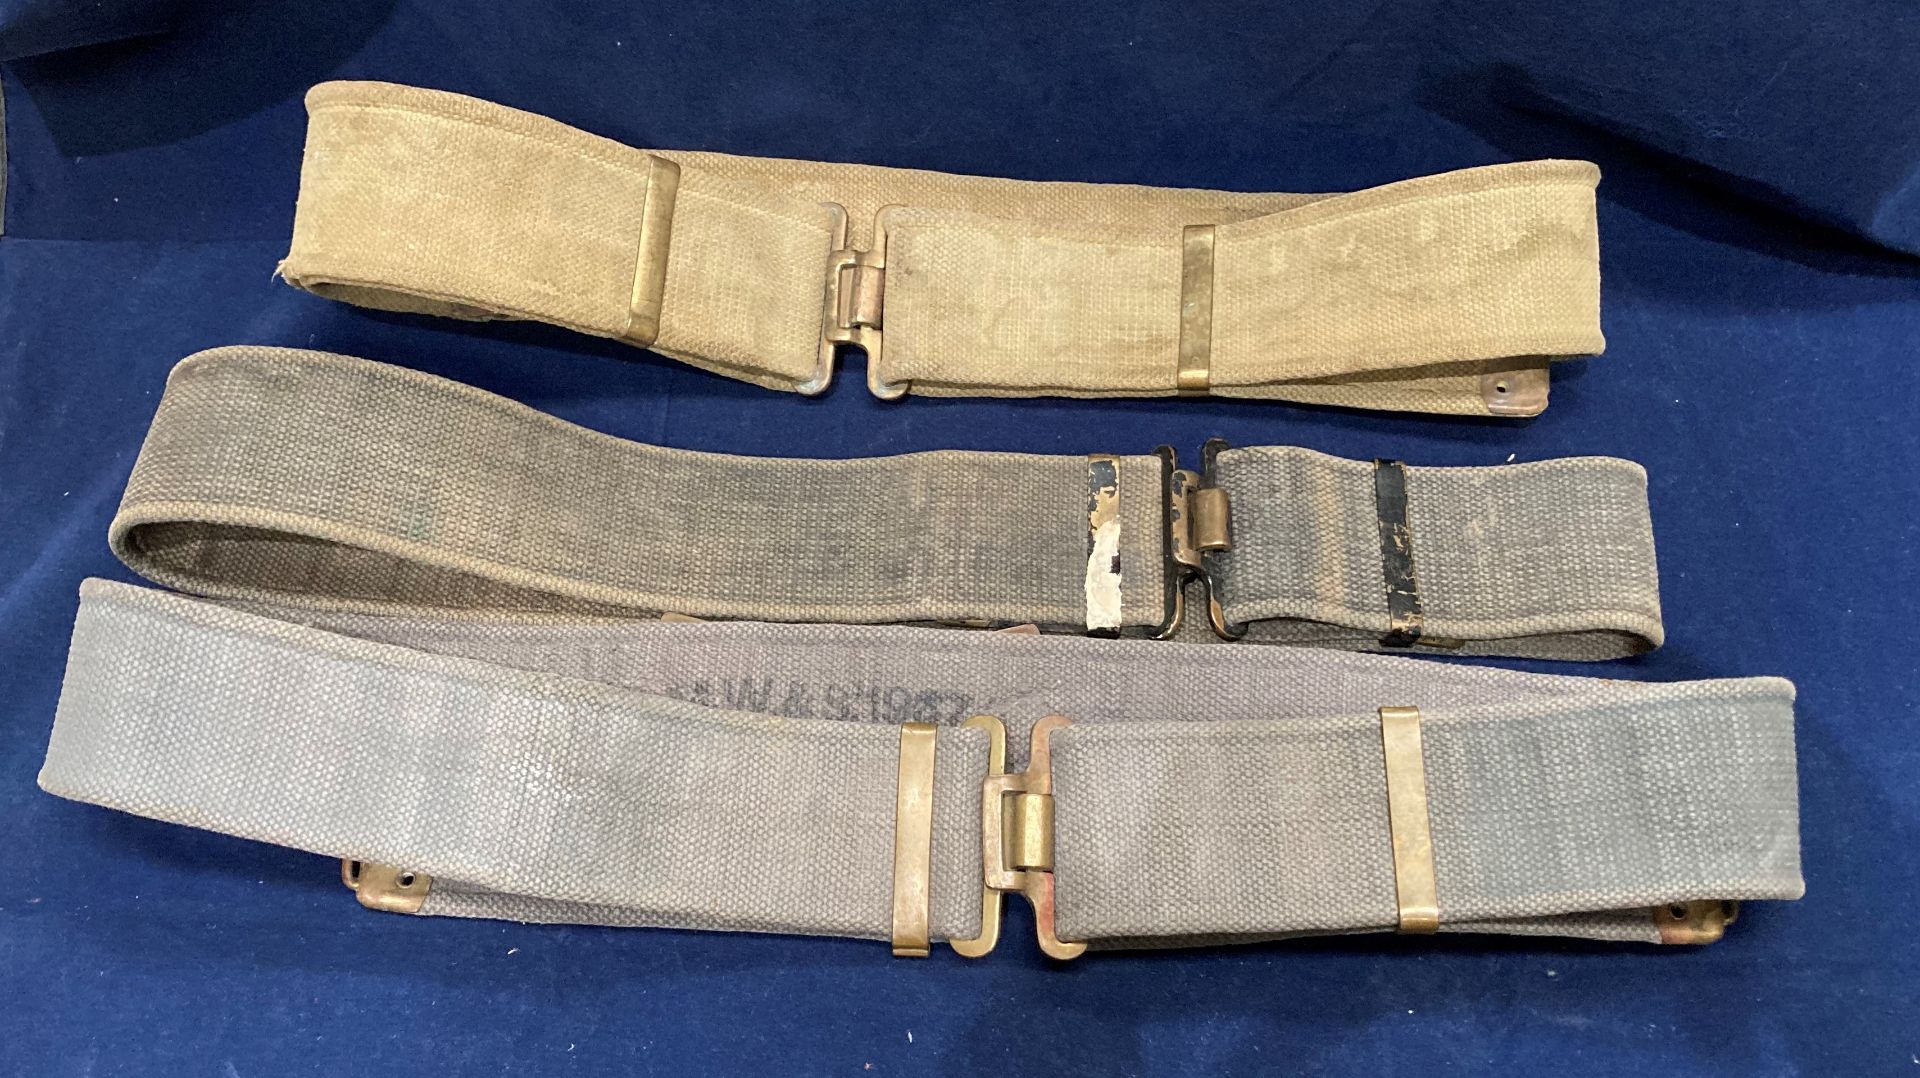 Two World War II British Army 37 pattern belts (one khaki and one grey) and a belt/utility strap